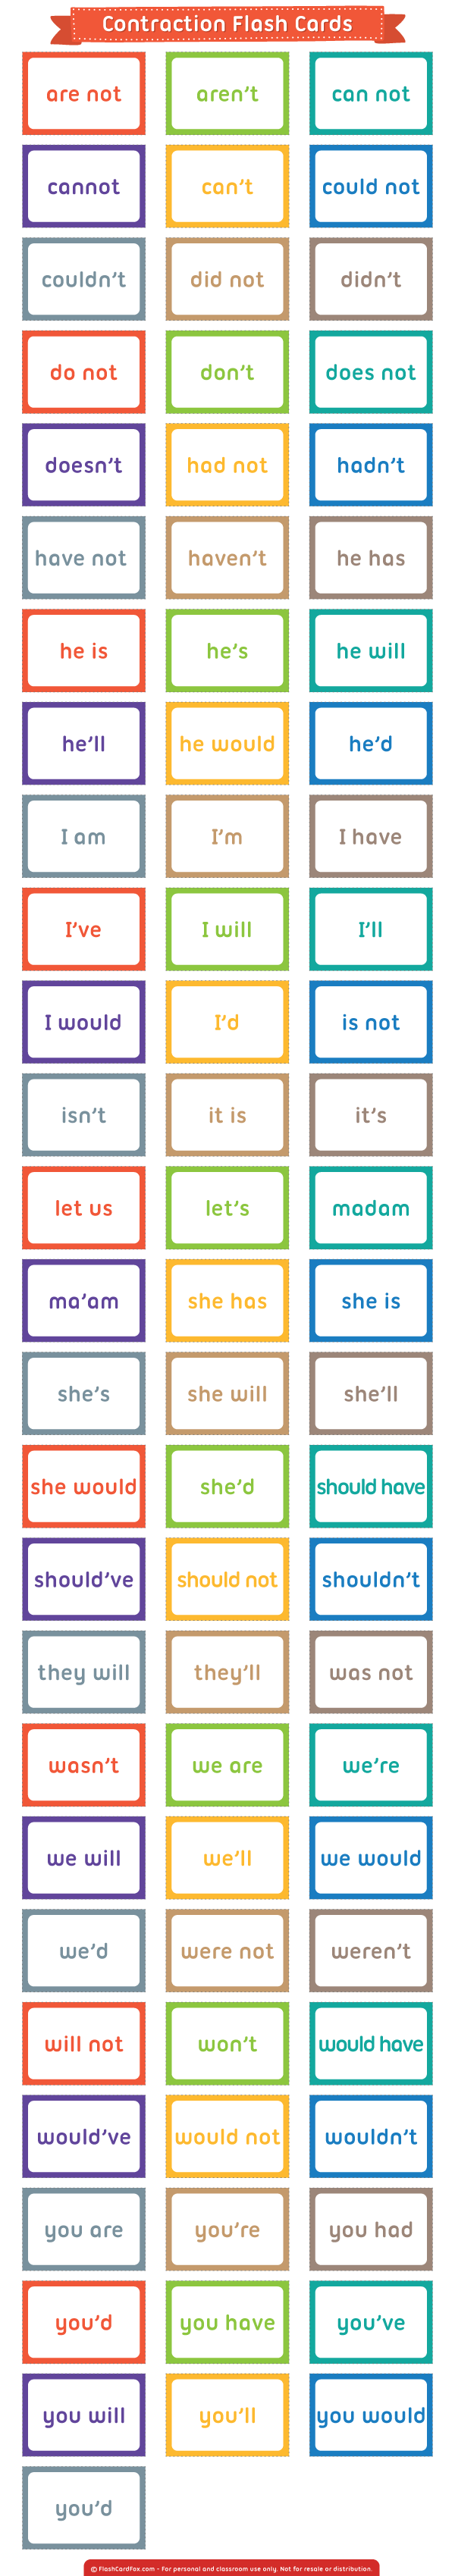 Free Printable Contraction Flash Cards